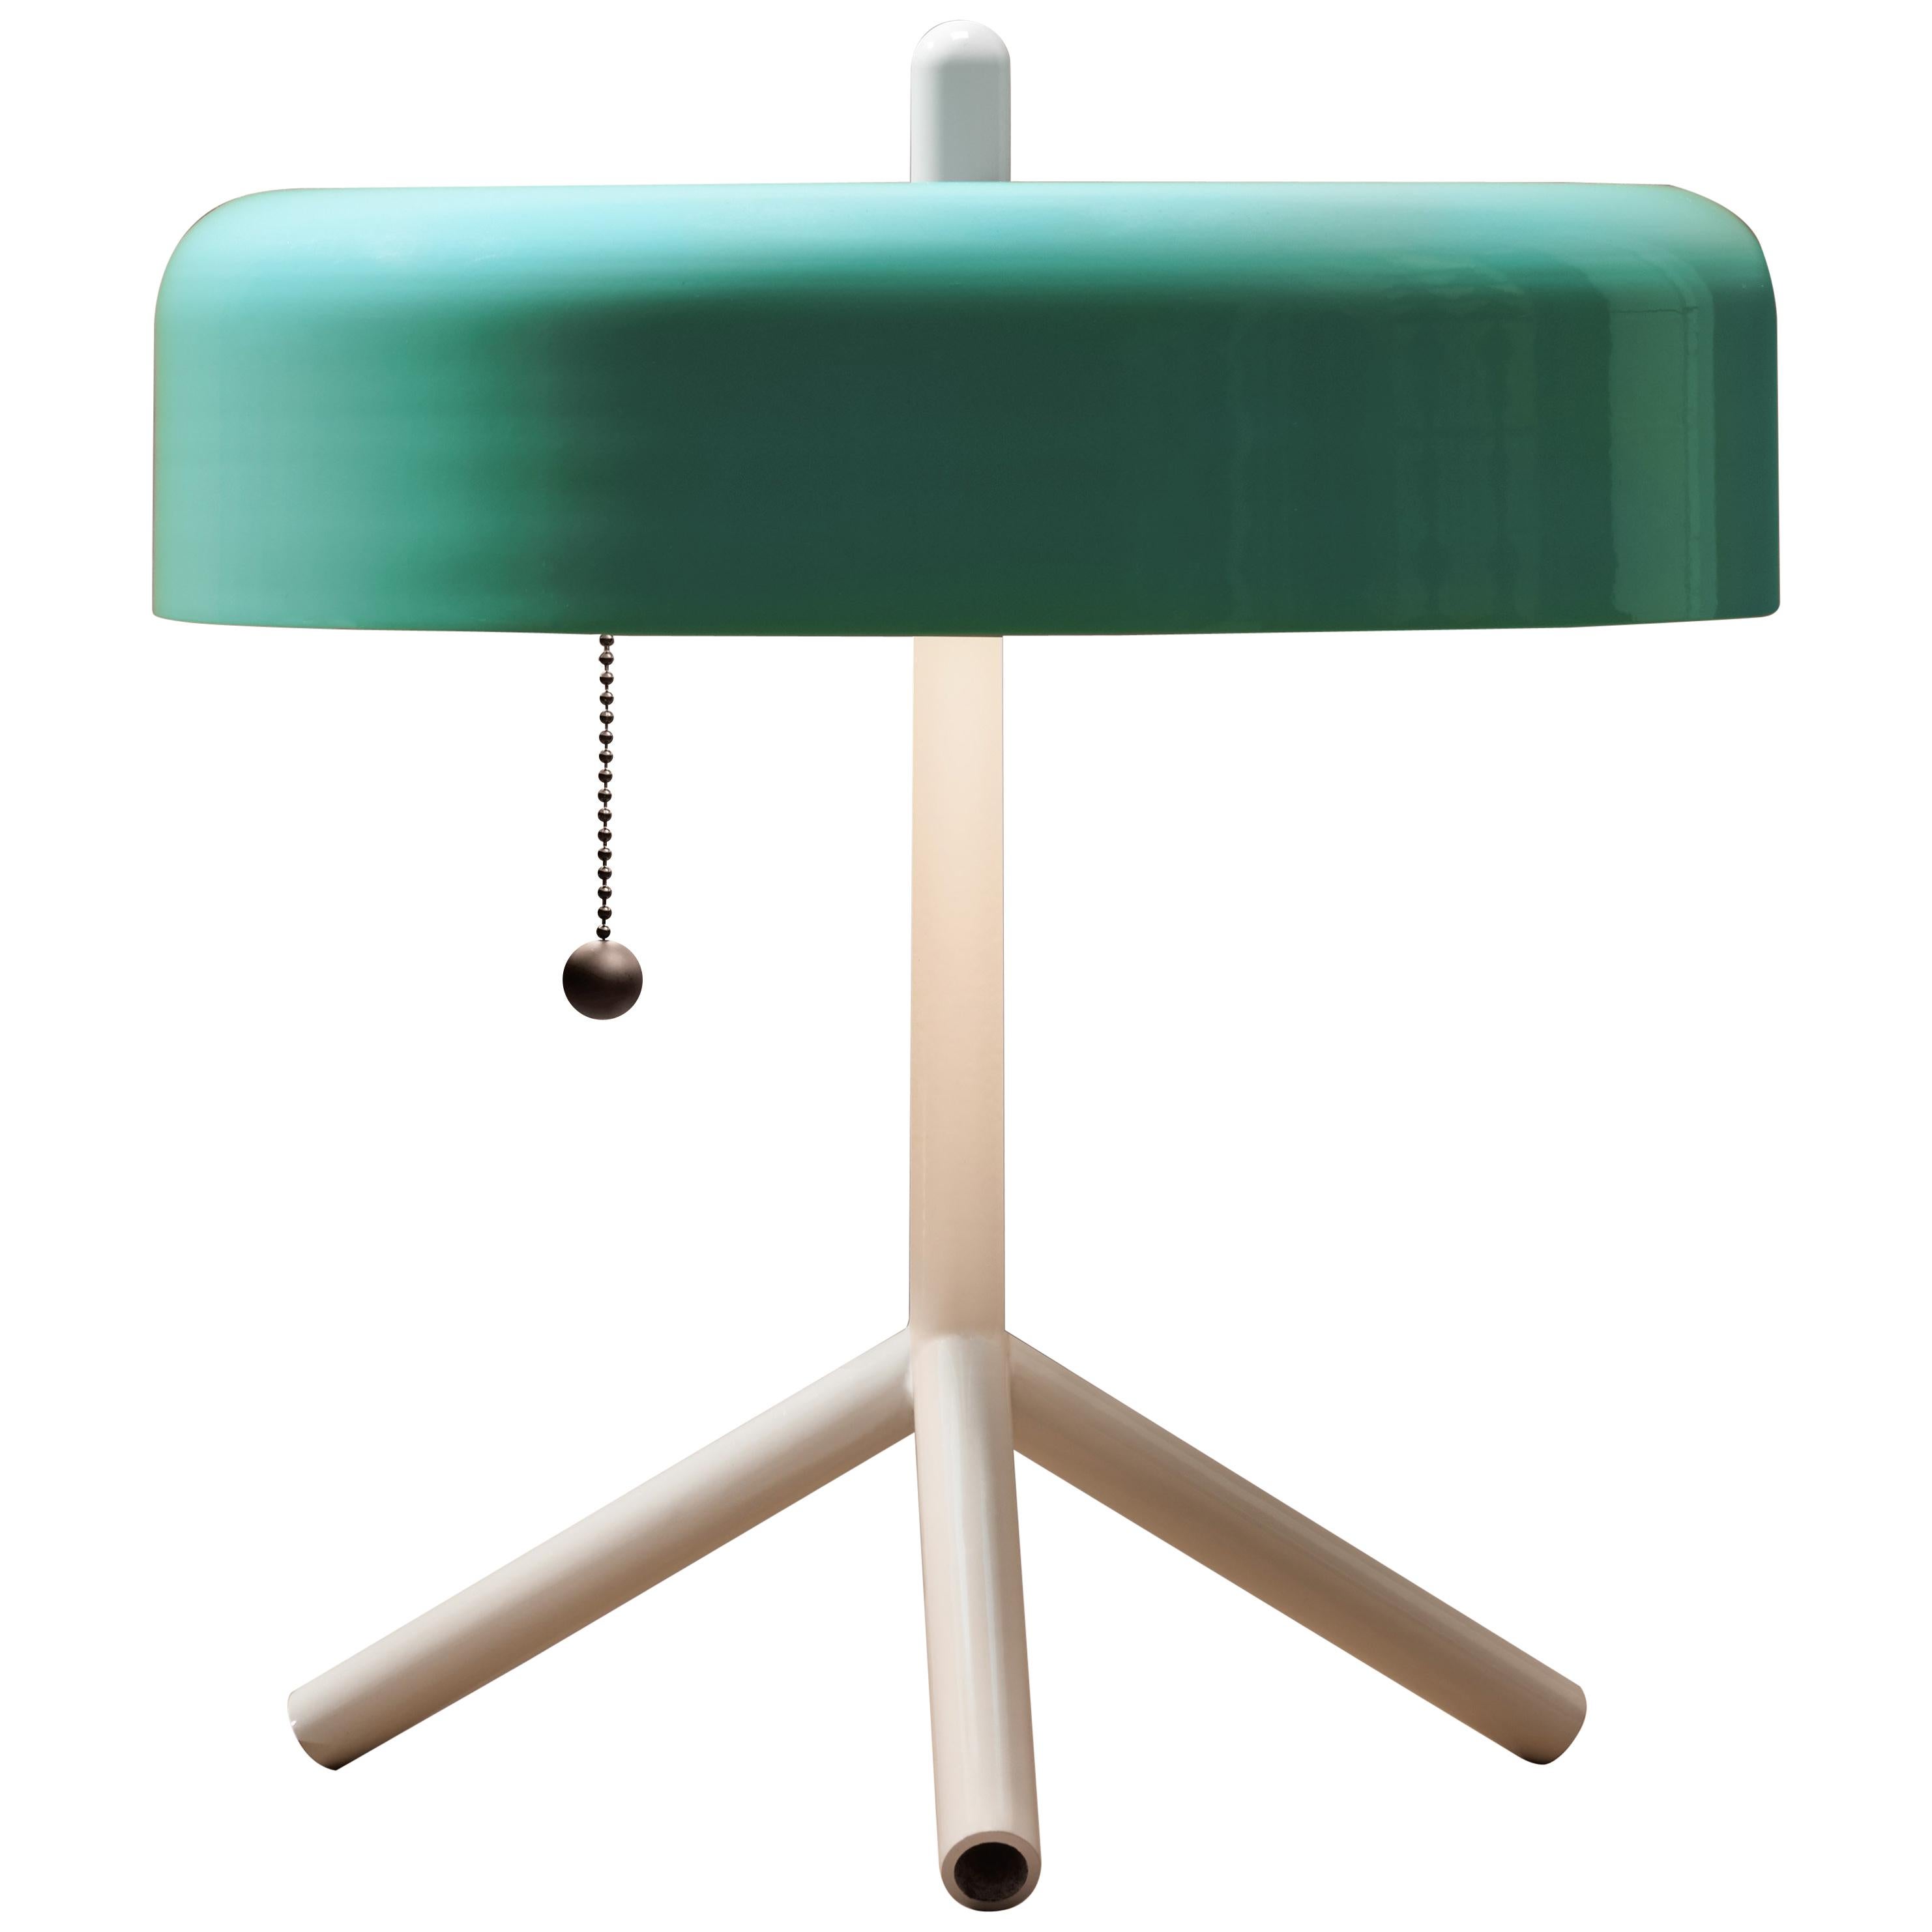 F/K/a Table Lamp in Teal, Cream & Cherry Tomato by Jonah Takagi For Sale